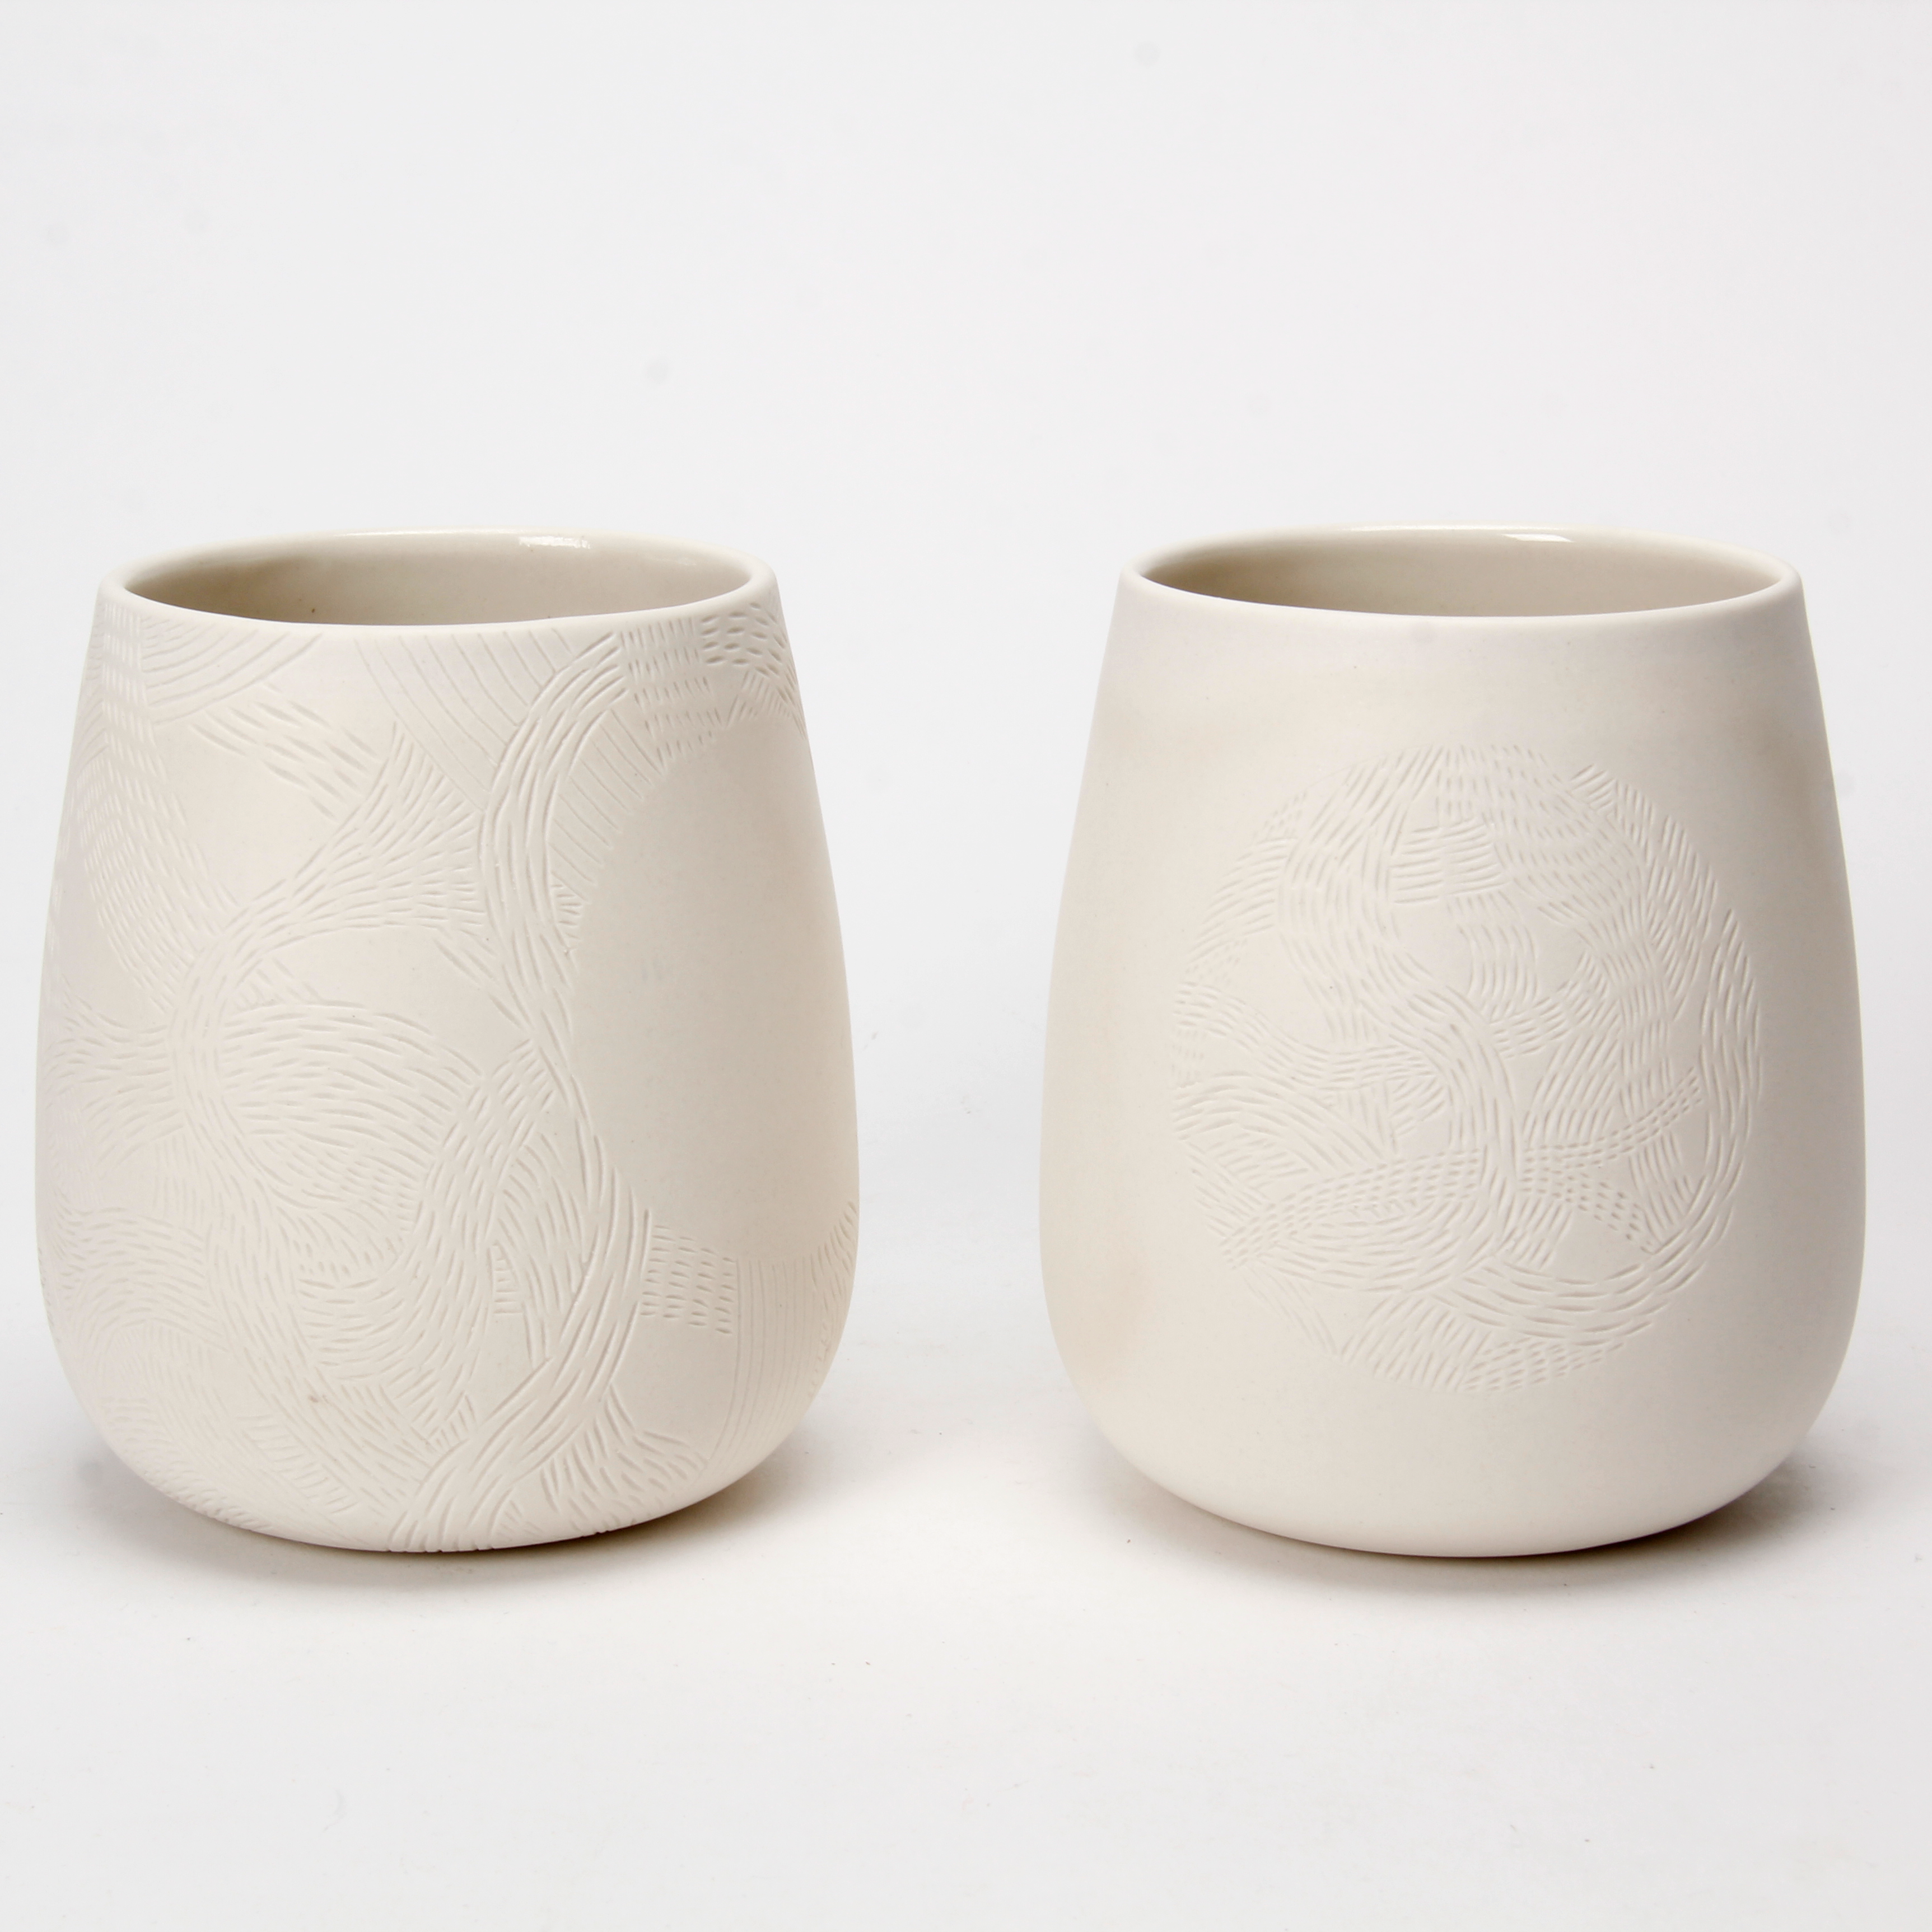 Talia Silva: Subtle Echoes – Naturally Carved Vessel Cup Product Image 2 of 2